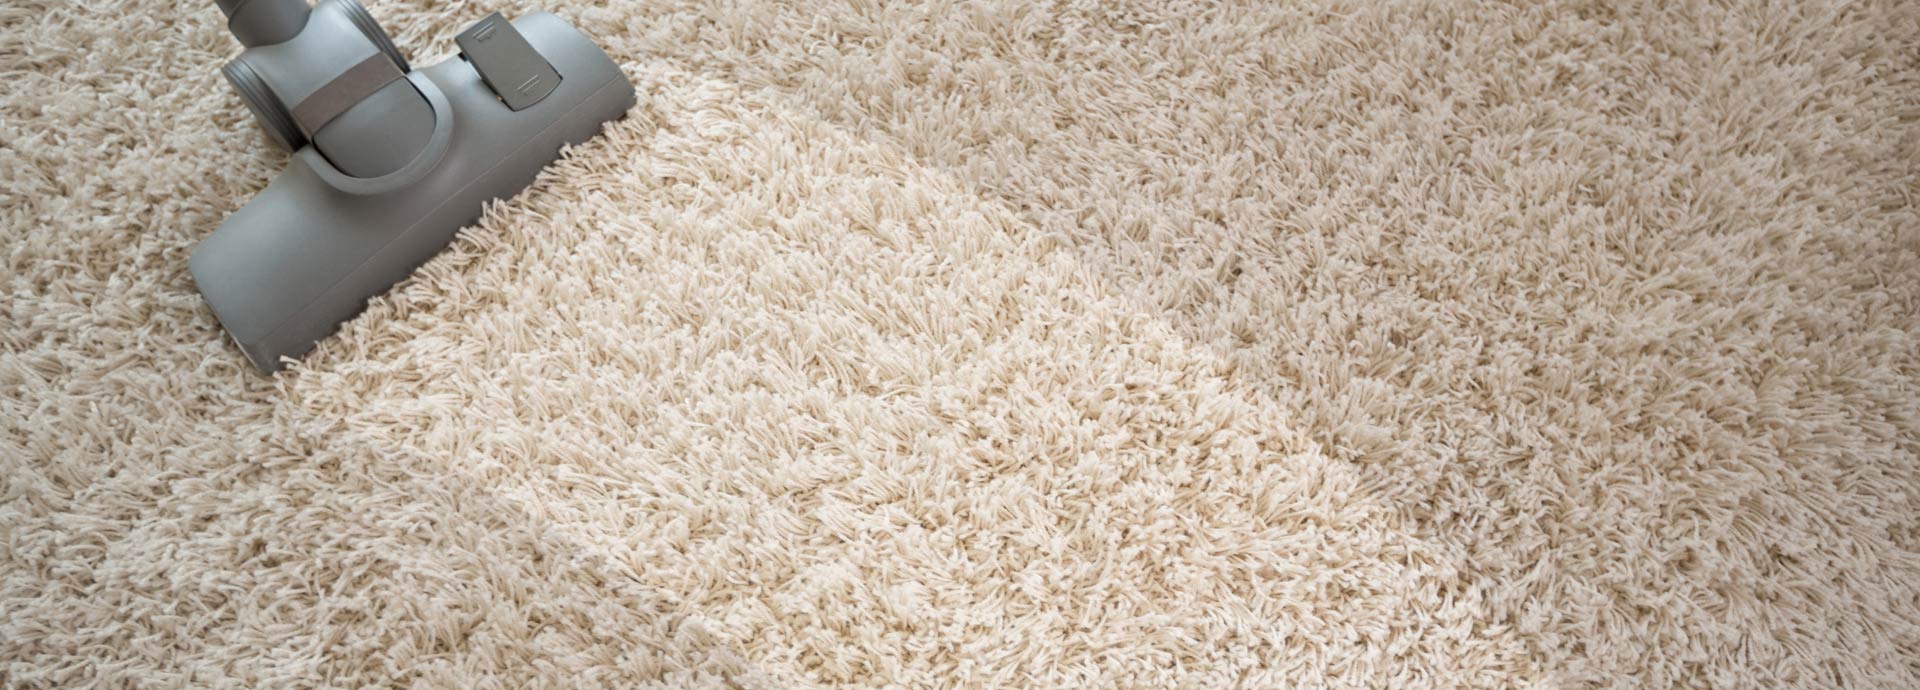 Carpet Cleaning In Houston Texas 1